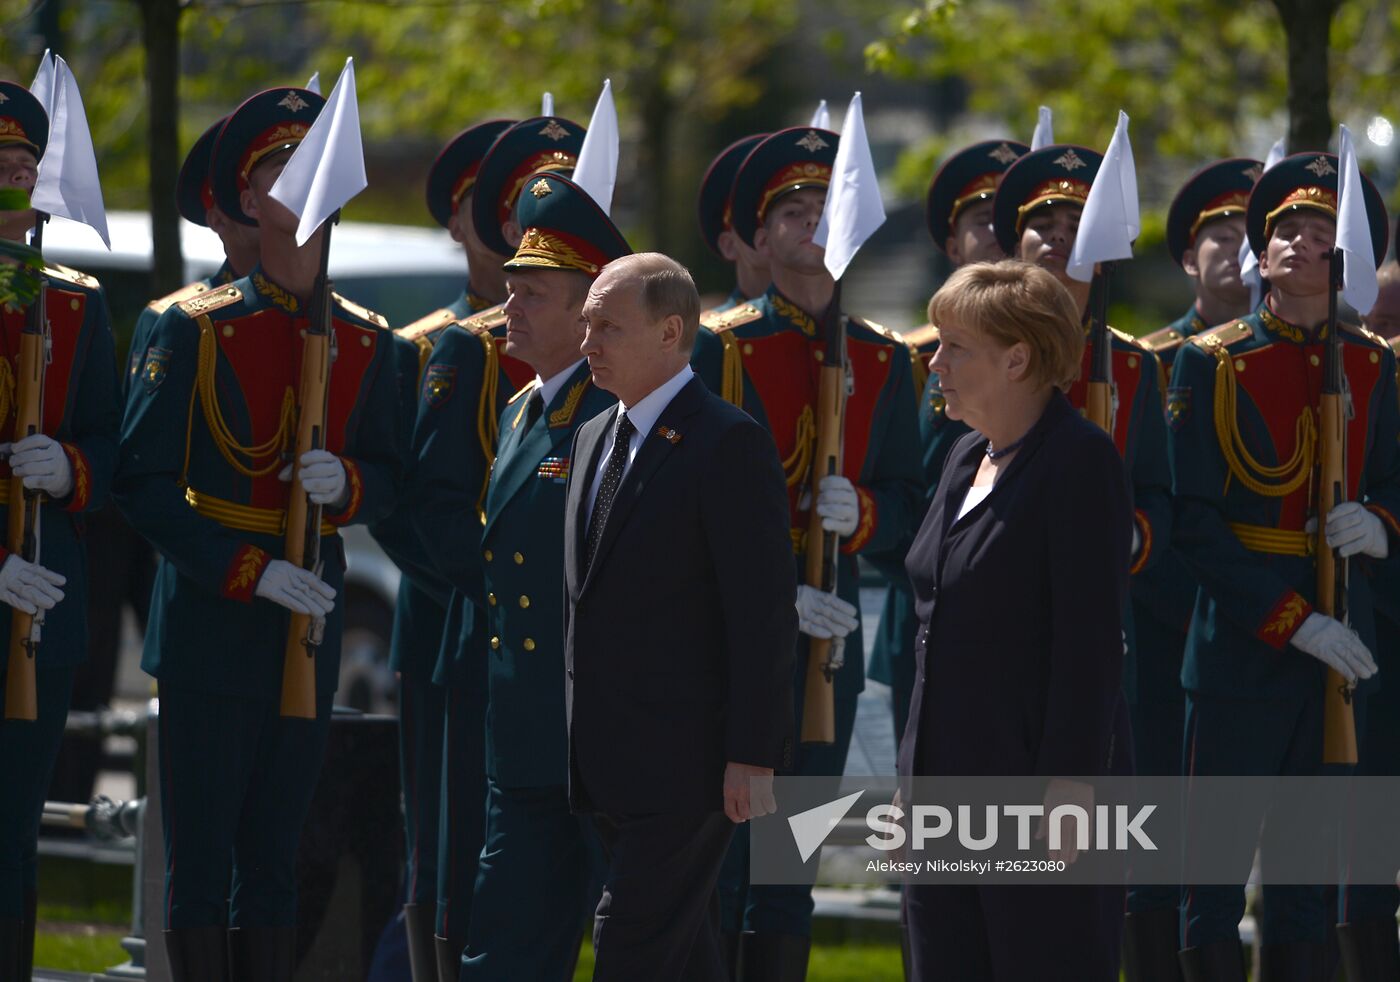 Vladimir Putin and German Chancellor Angela Merkel lay flowers at Tomb of the Unknown Soldier